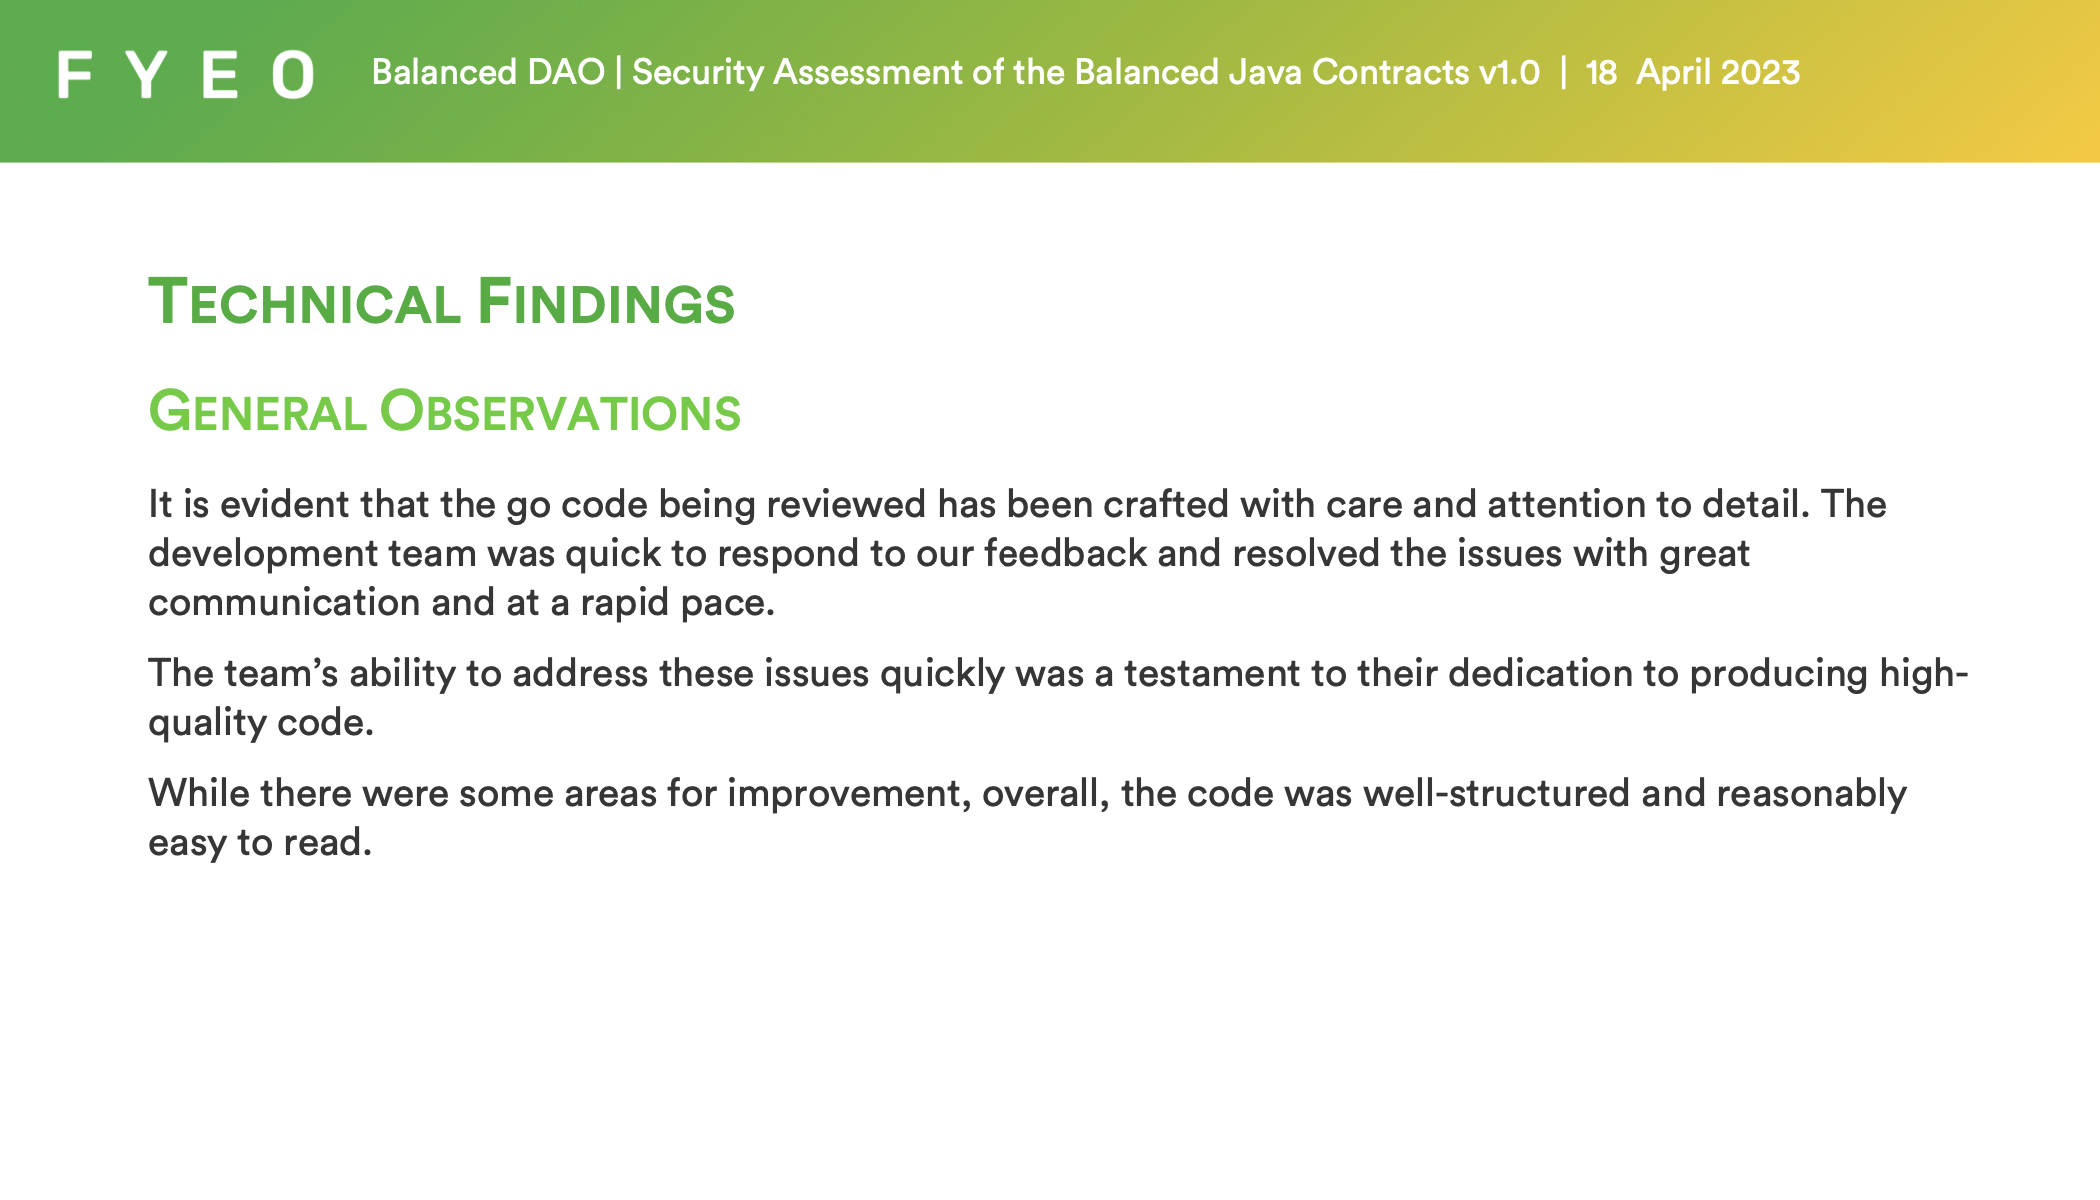 It is evident that the go code being reviewed has been crafted with care and attention to detail. The development team was quick to respond to our feedback and resolved the issues with great communication and at a rapid pace. The team’s ability to address these issues quickly was a testament to their dedication to producing high-quality code. While there were some areas for improvement, overall, the code was well-structured and reasonably easy to read.